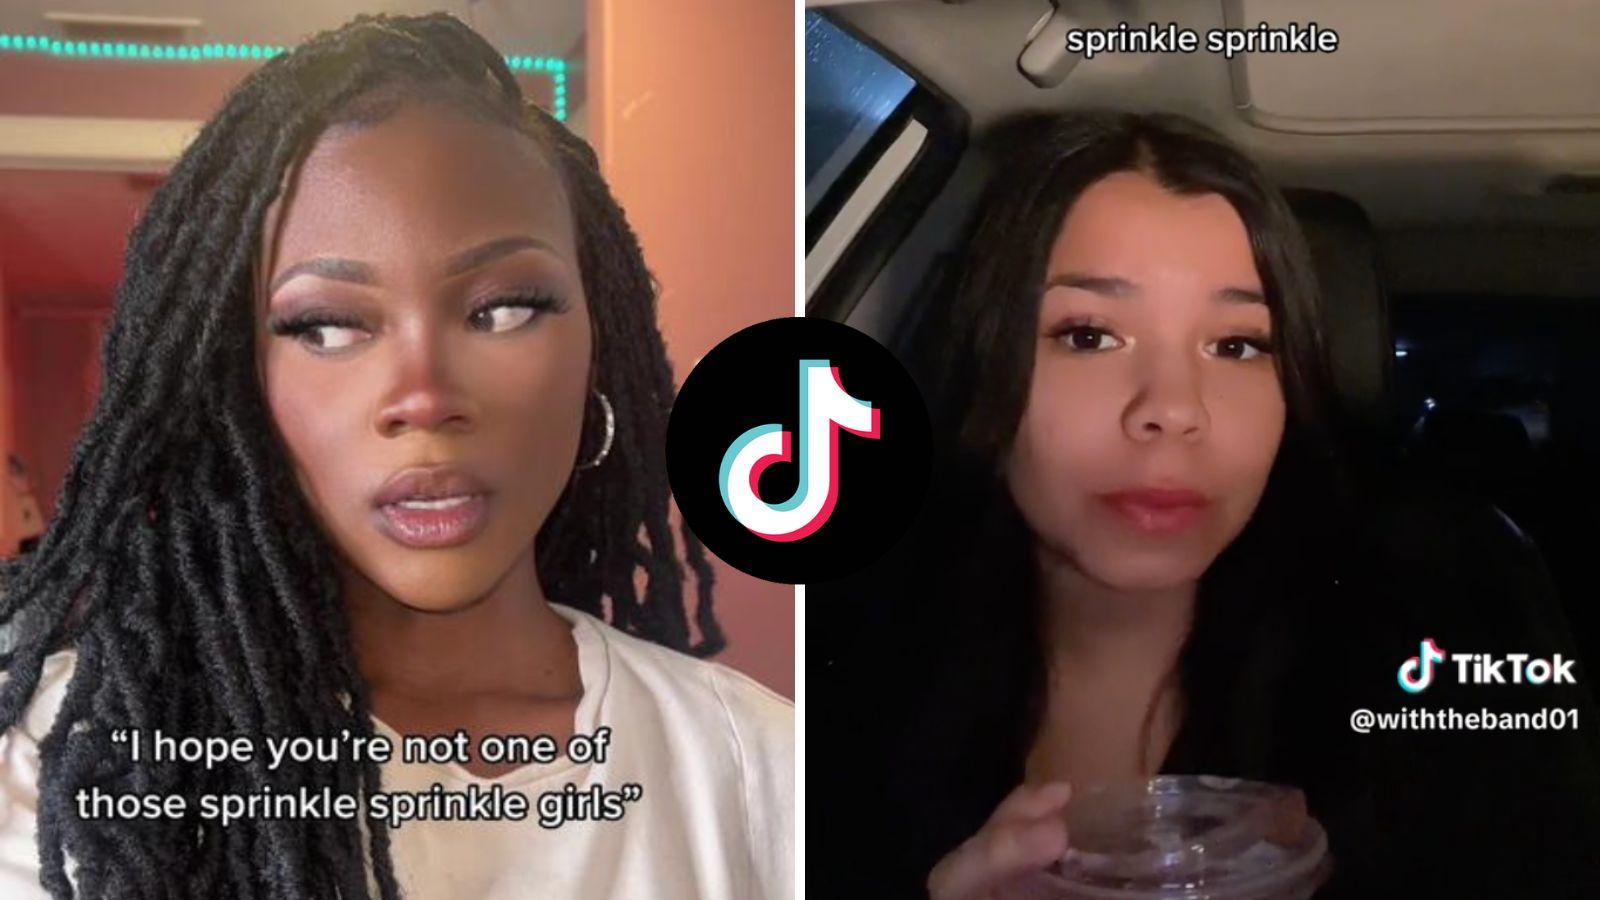 Banned r EDP goes viral on TikTok with new account after Super Bowl  - Dexerto